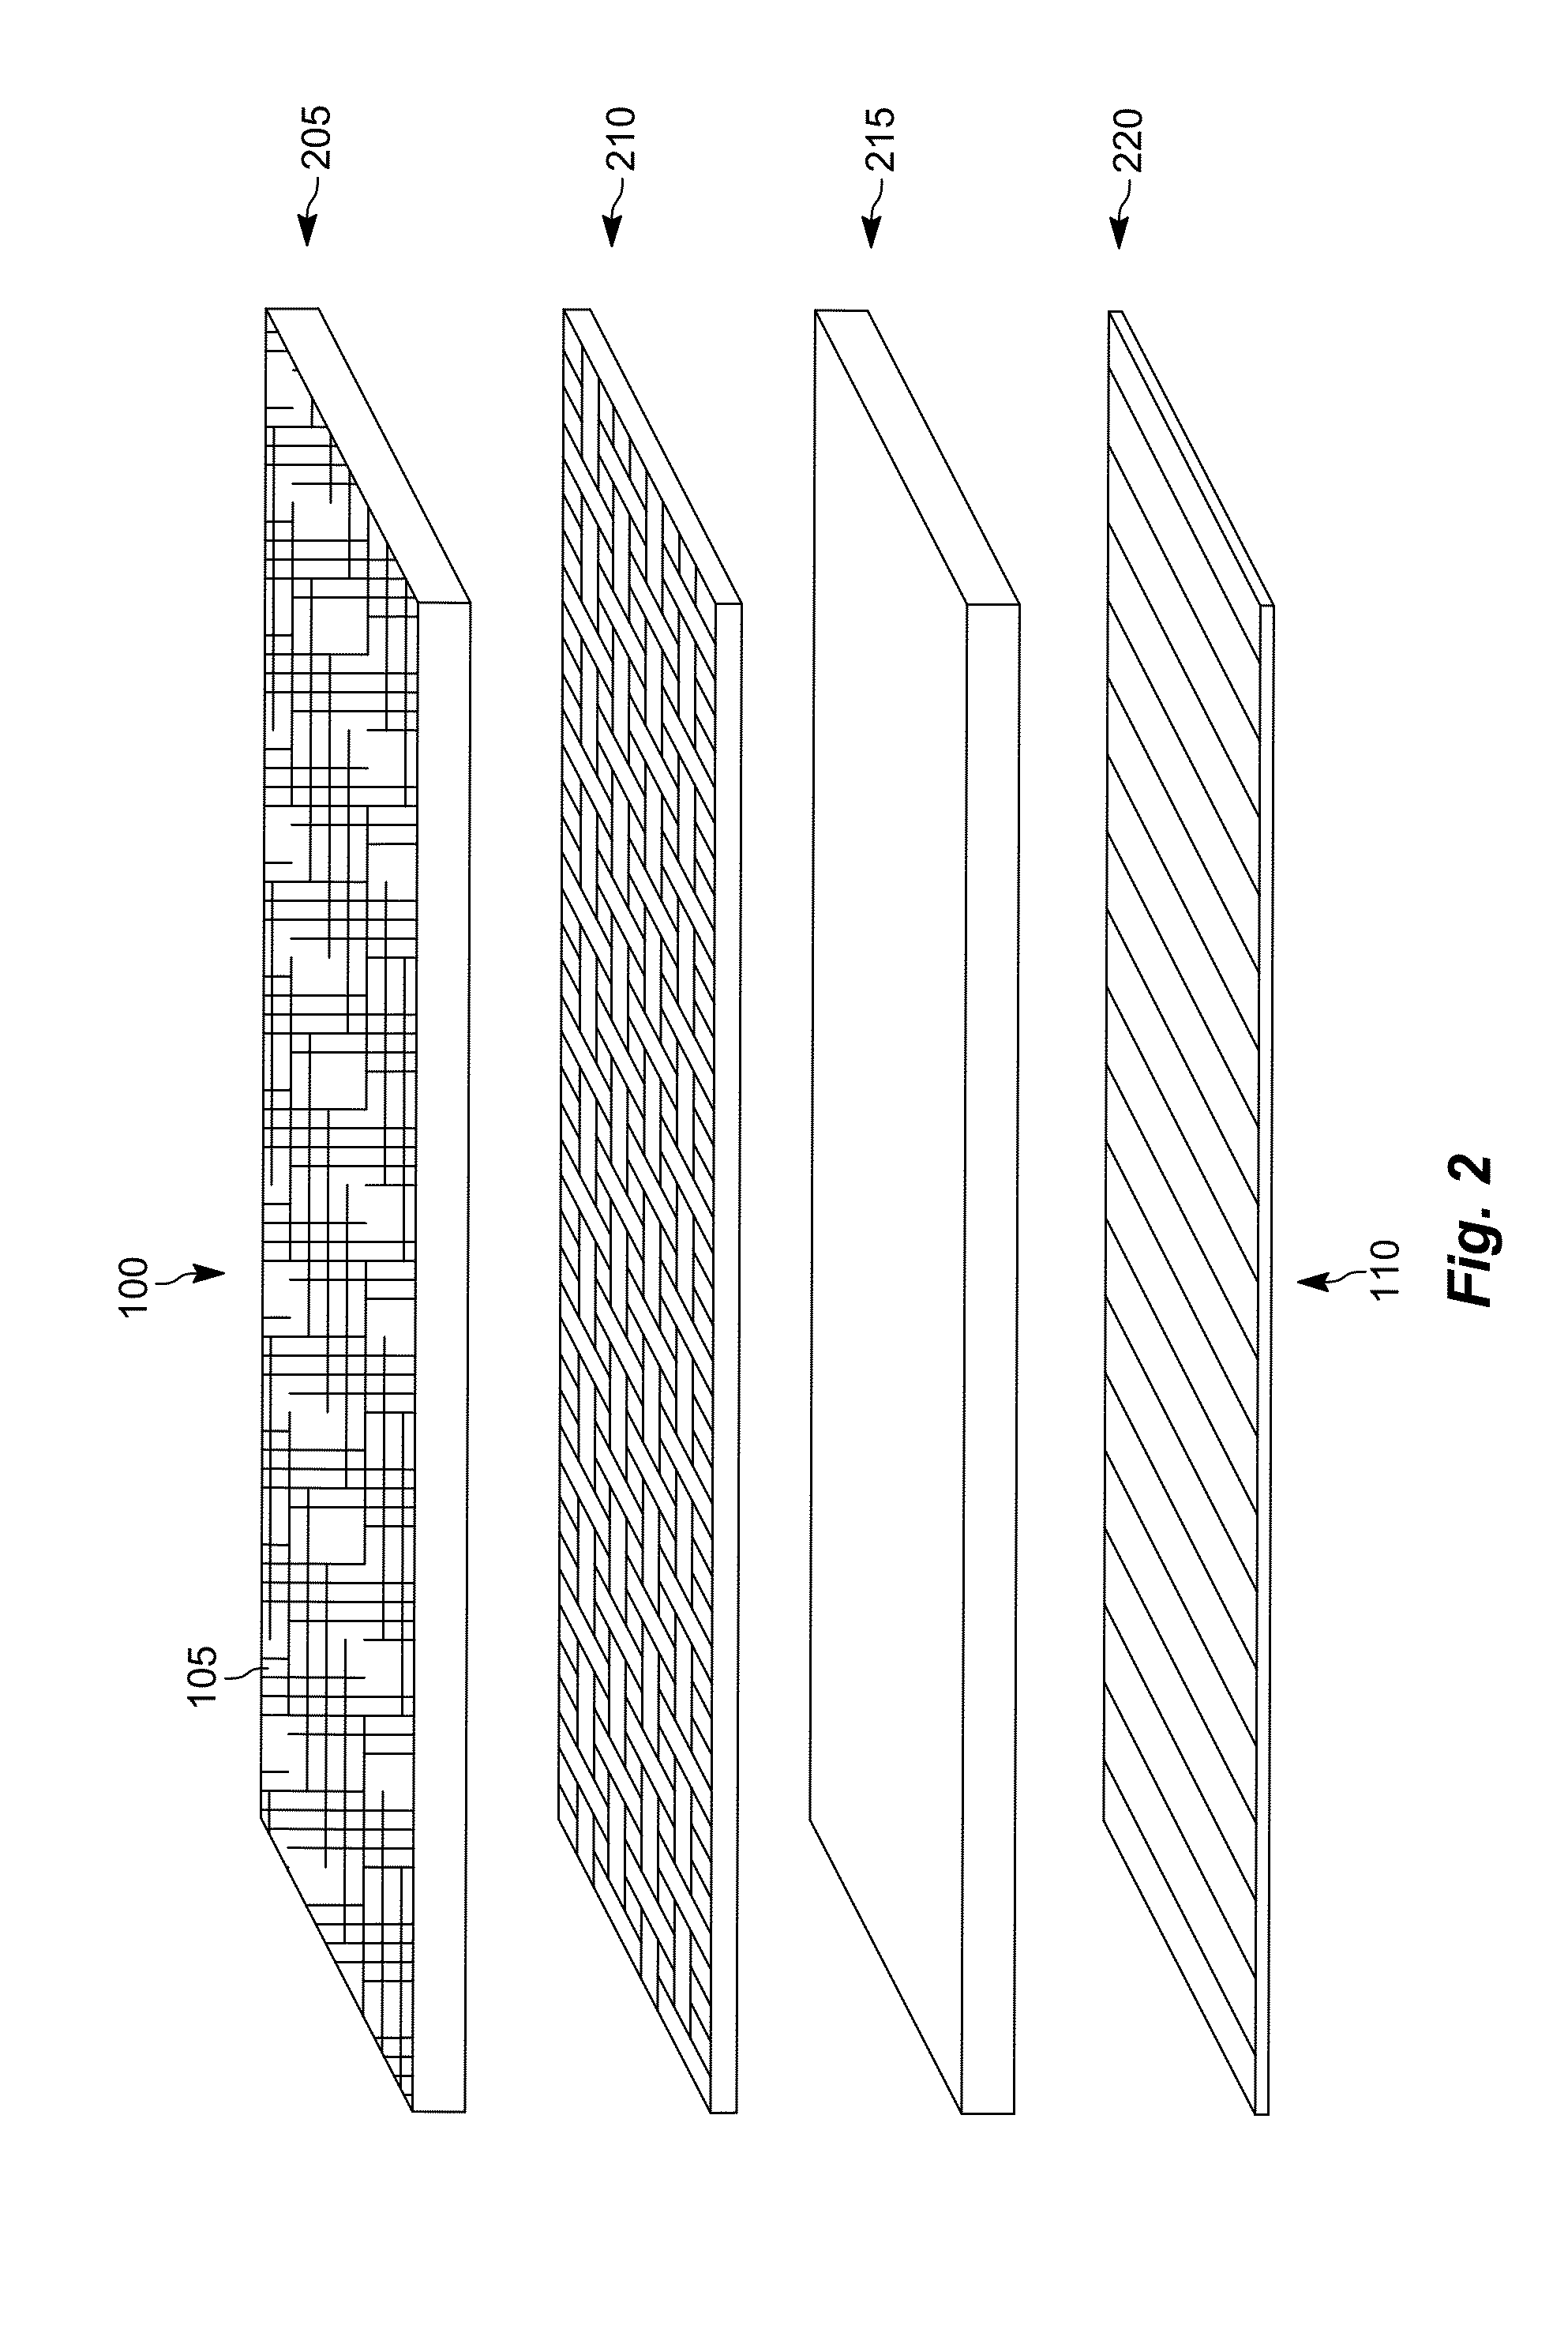 Composite tile systems and methods